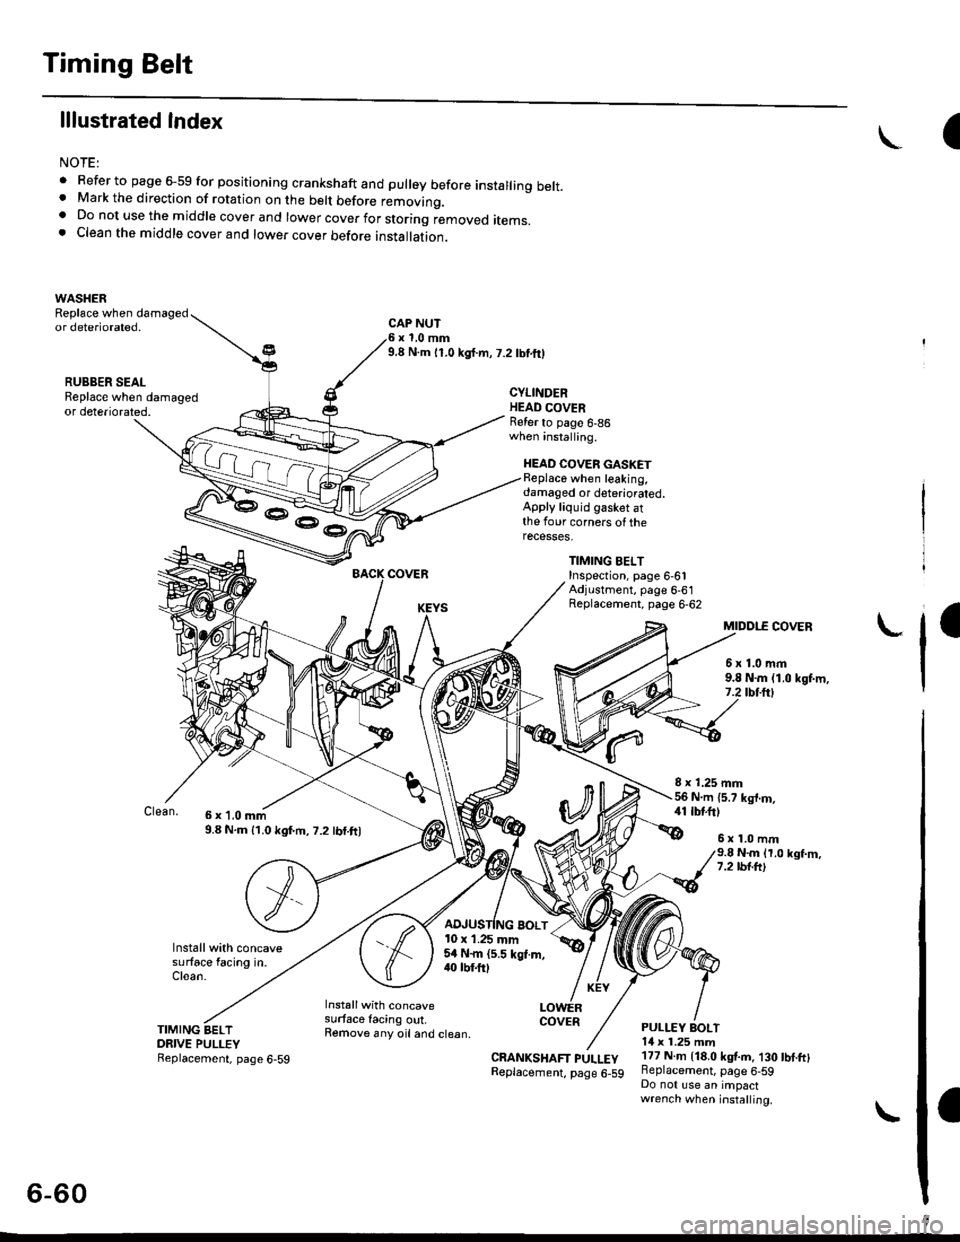 HONDA CIVIC 1998 6.G Service Manual Timing Belt
lllustrated Index
NOTE:
. Refer to page 6-59 for positioning crankshaft and pulley before installing belt.. Mark the direction of rotation on the belt before removino.a Do not use the midd